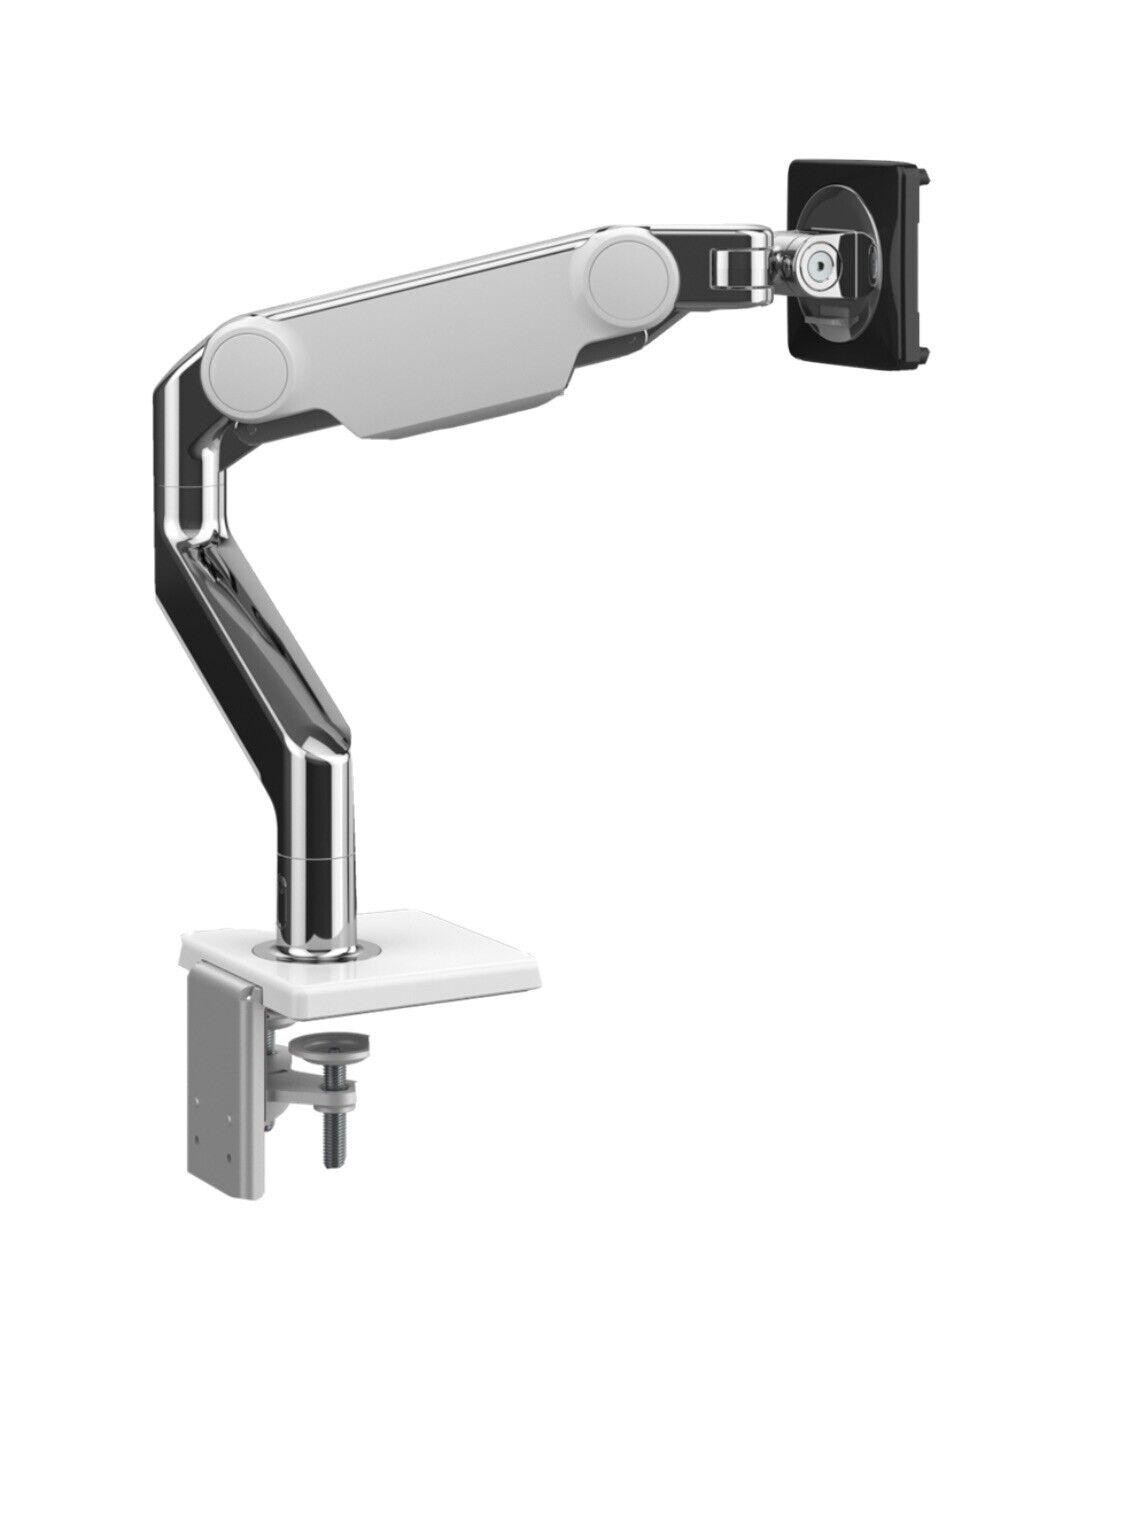 Humanscale M10 Monitor Arm, White with Polished Trim, Clamp Mount